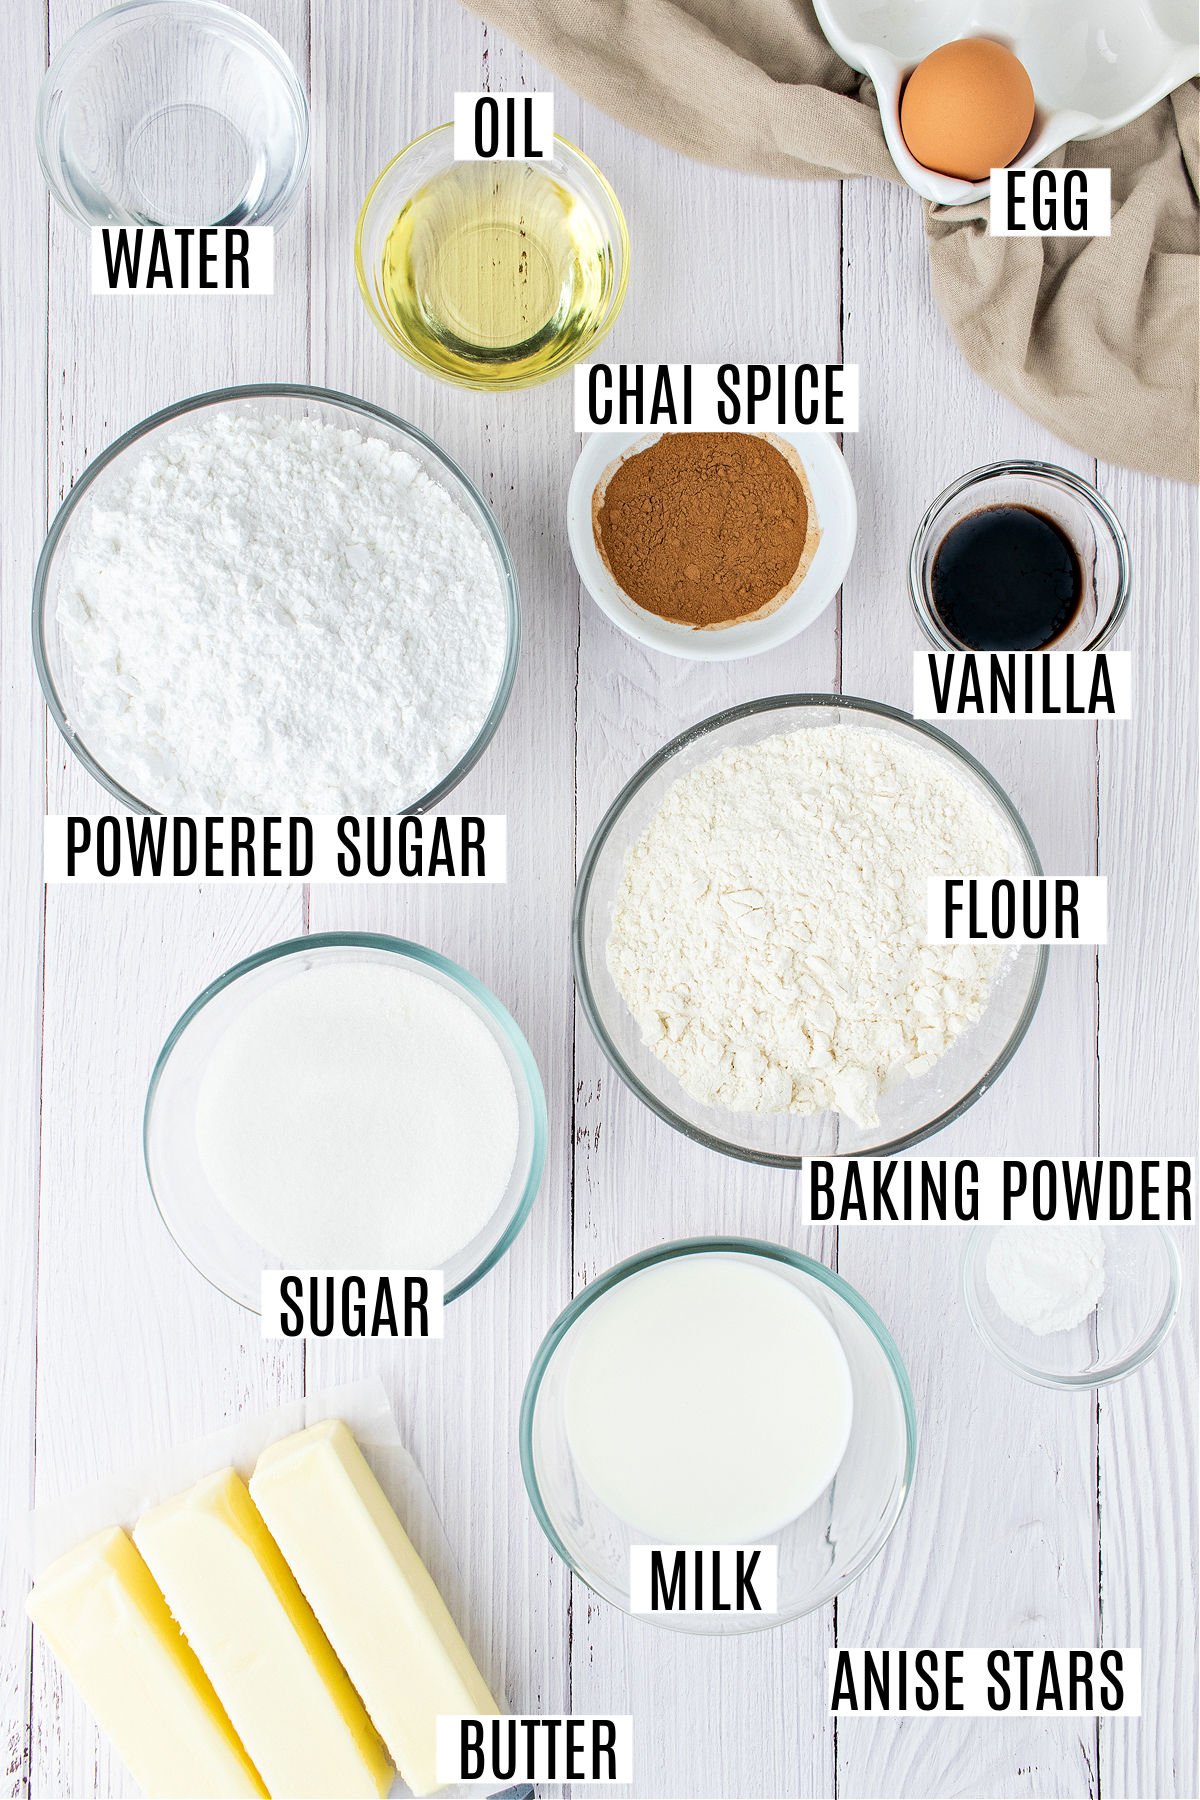 Ingredients needed to make chai spice cupcakes.